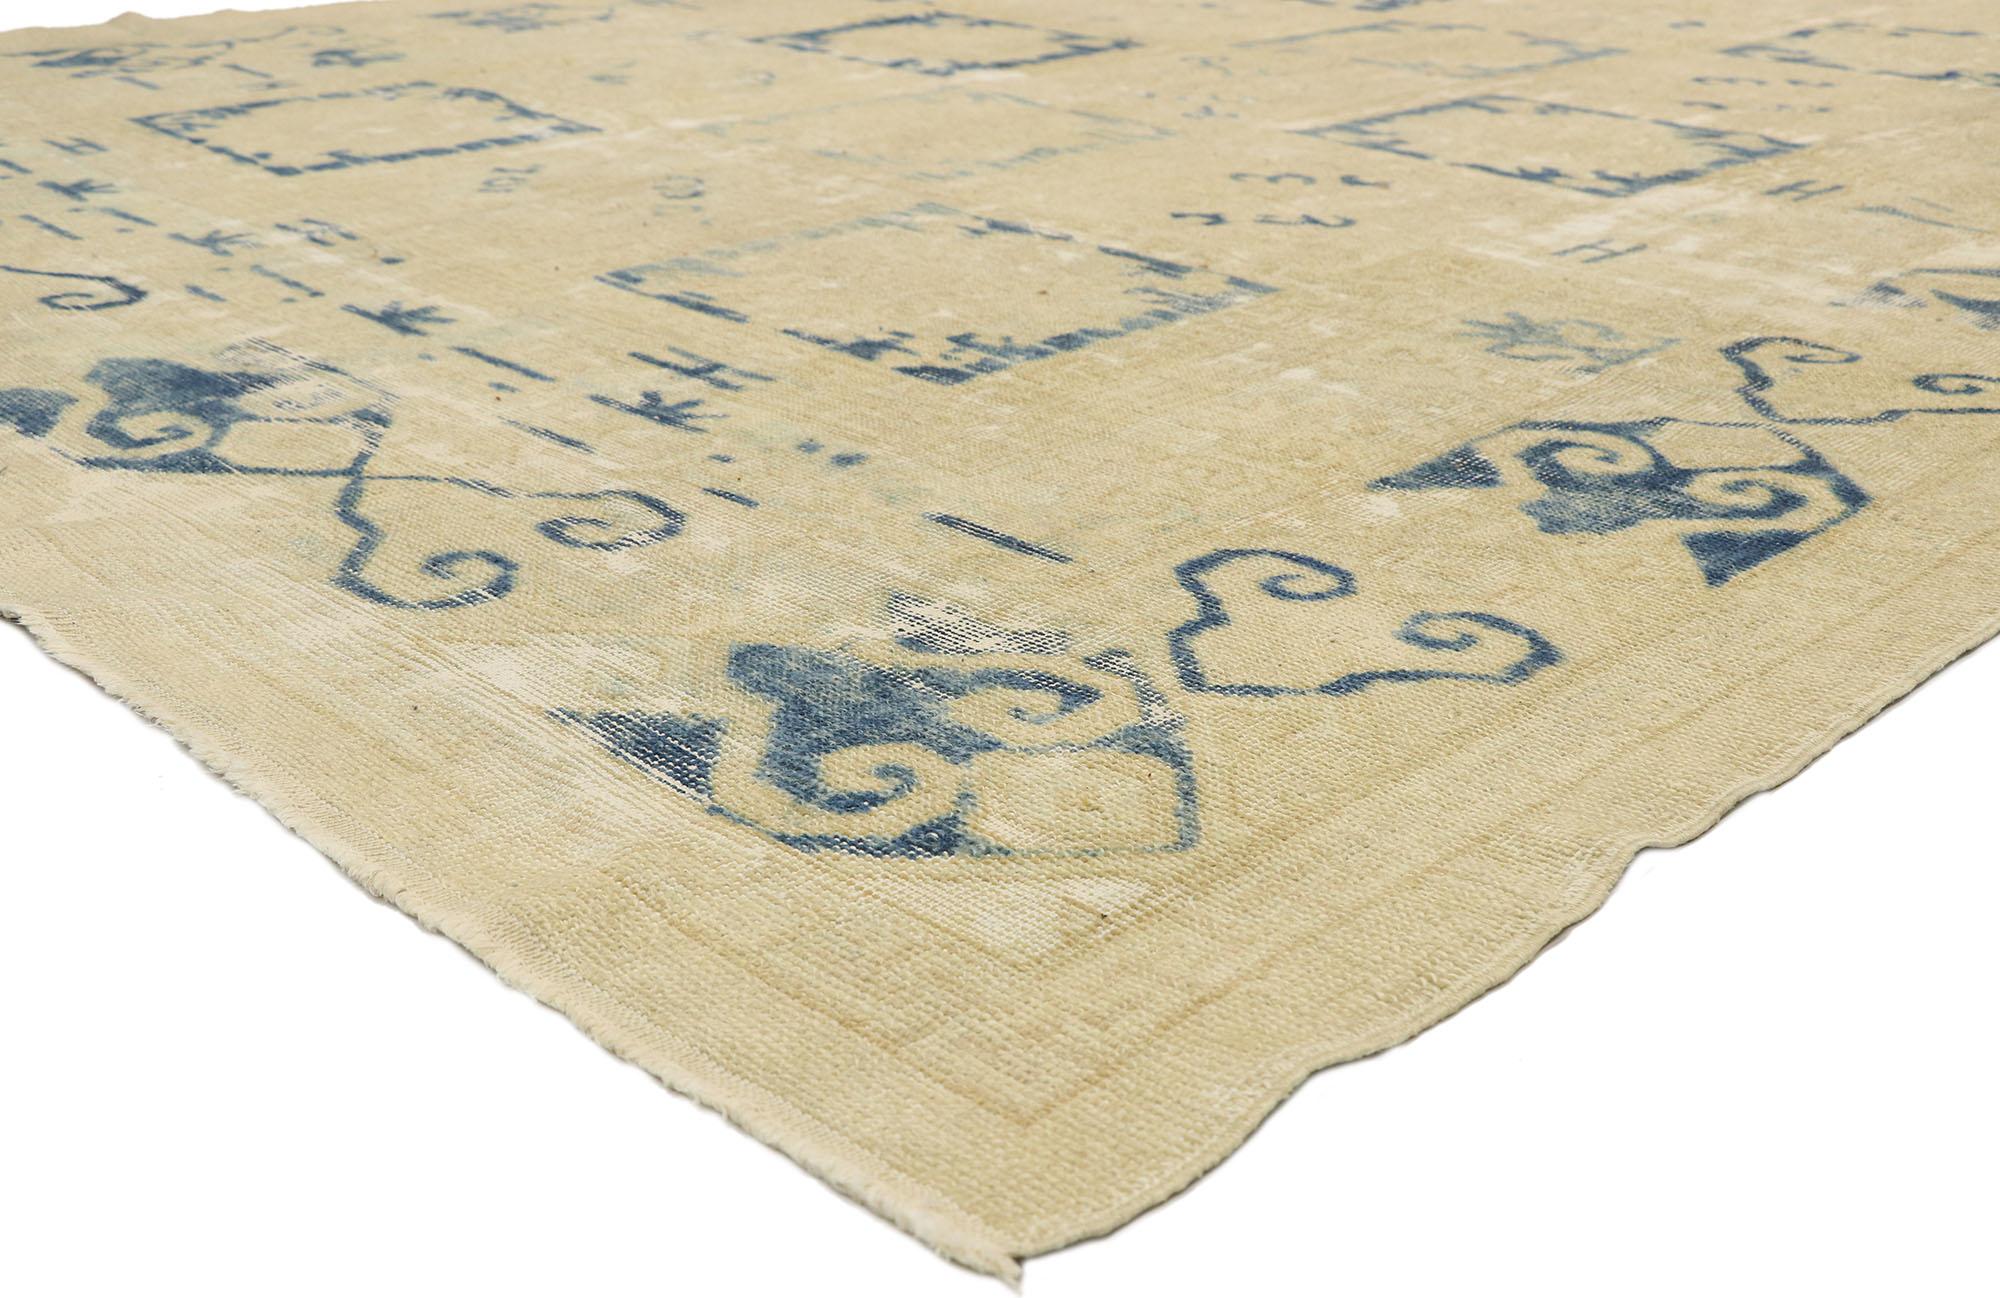 51592 distressed antique Turkish Oushak Area rug with Modern Mediterranean Greek style. With its warm beige and blue hues inspired by modern Mediterranean vibes, this hand knotted wool distressed antique Turkish Oushak rug is well-balanced and